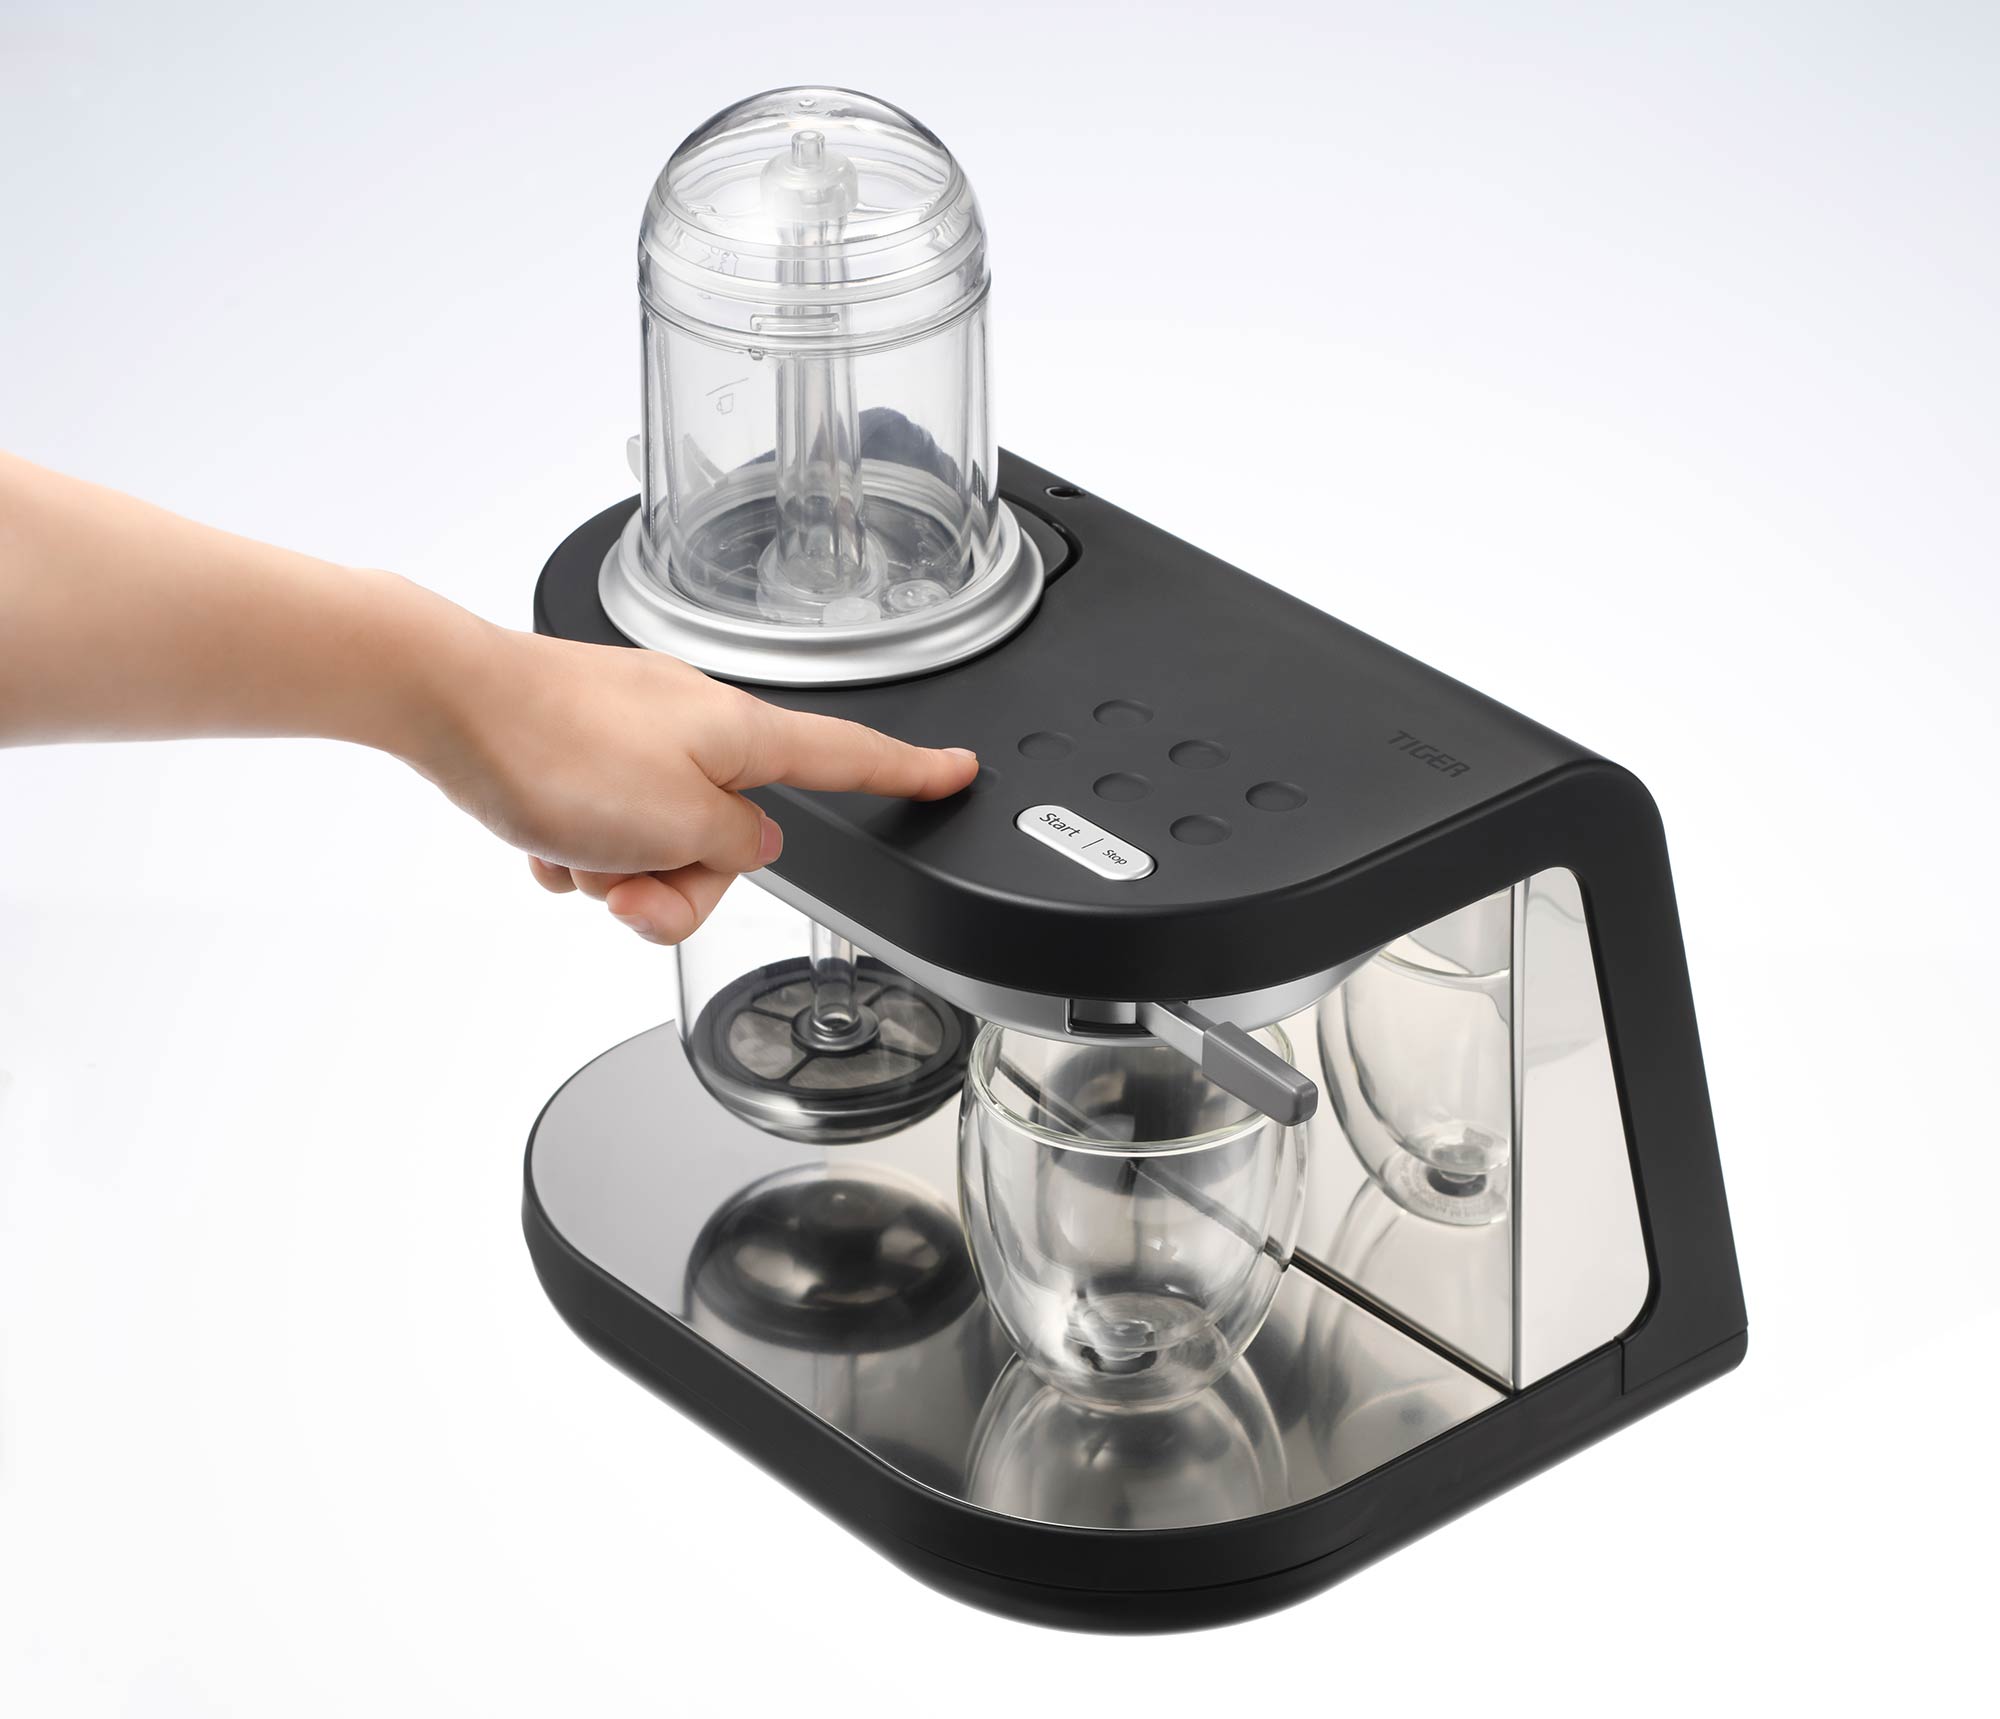 https://www.gessato.com/wp-content/uploads/2022/05/siphonysta-automated-siphon-coffee-maker-5.jpg